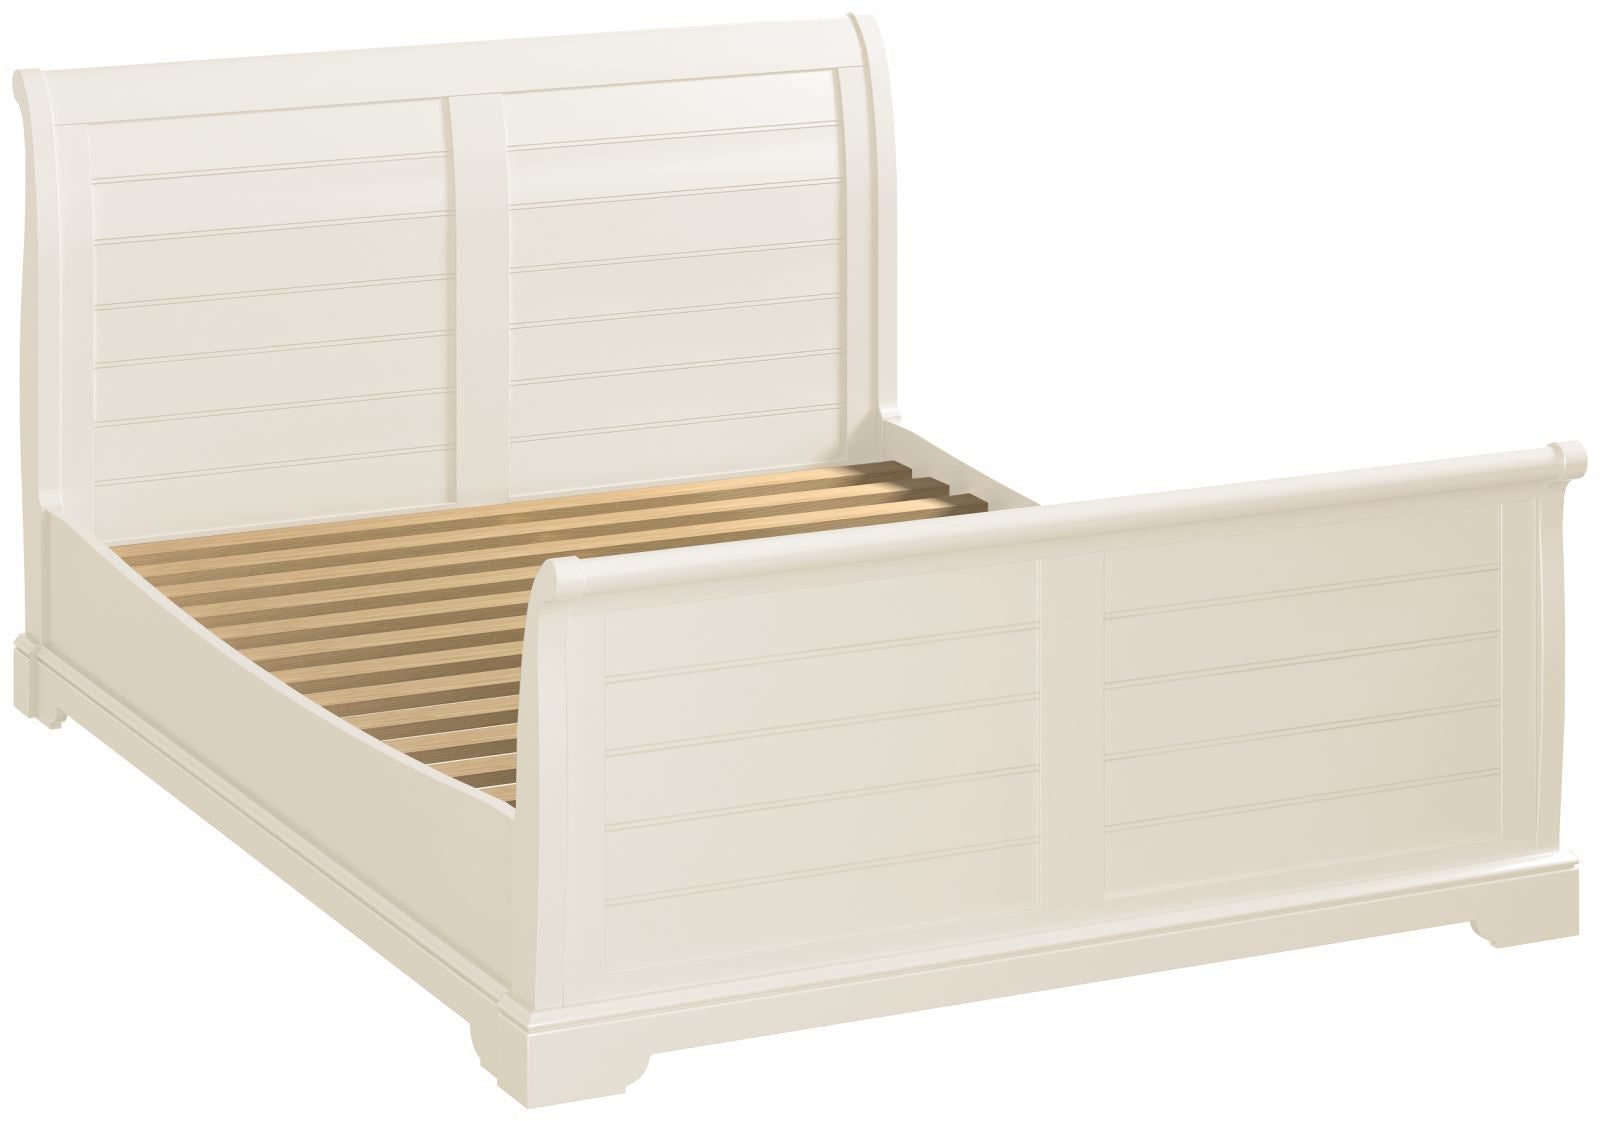 Lilibet Bed King Size Sleigh